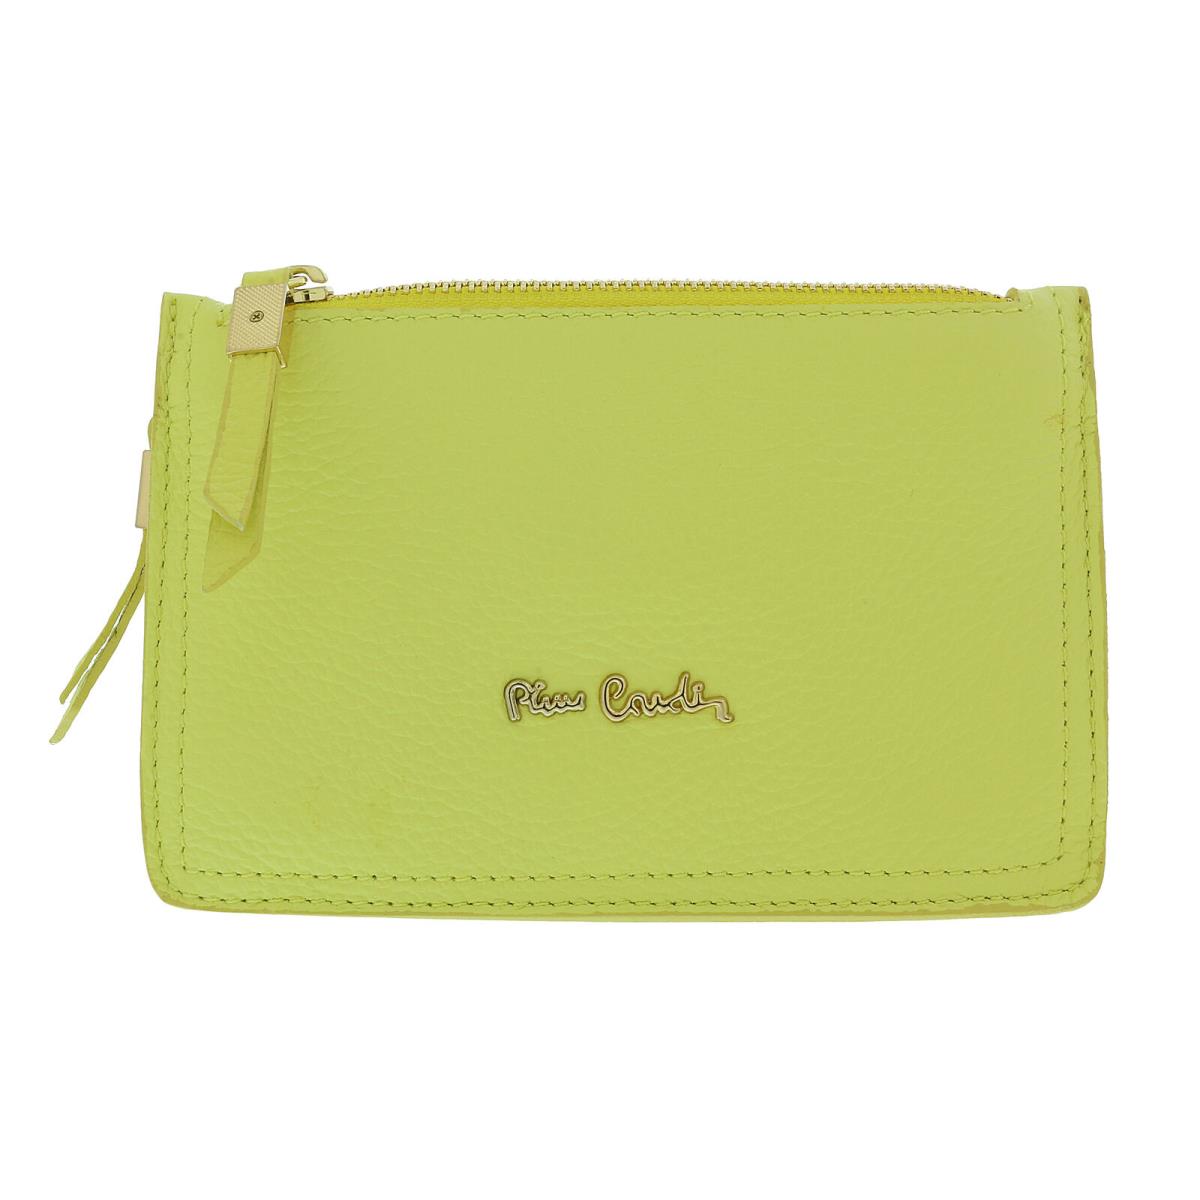 Pierre Cardin Lemon Leather Small Structured Square Crossbody Bag - 